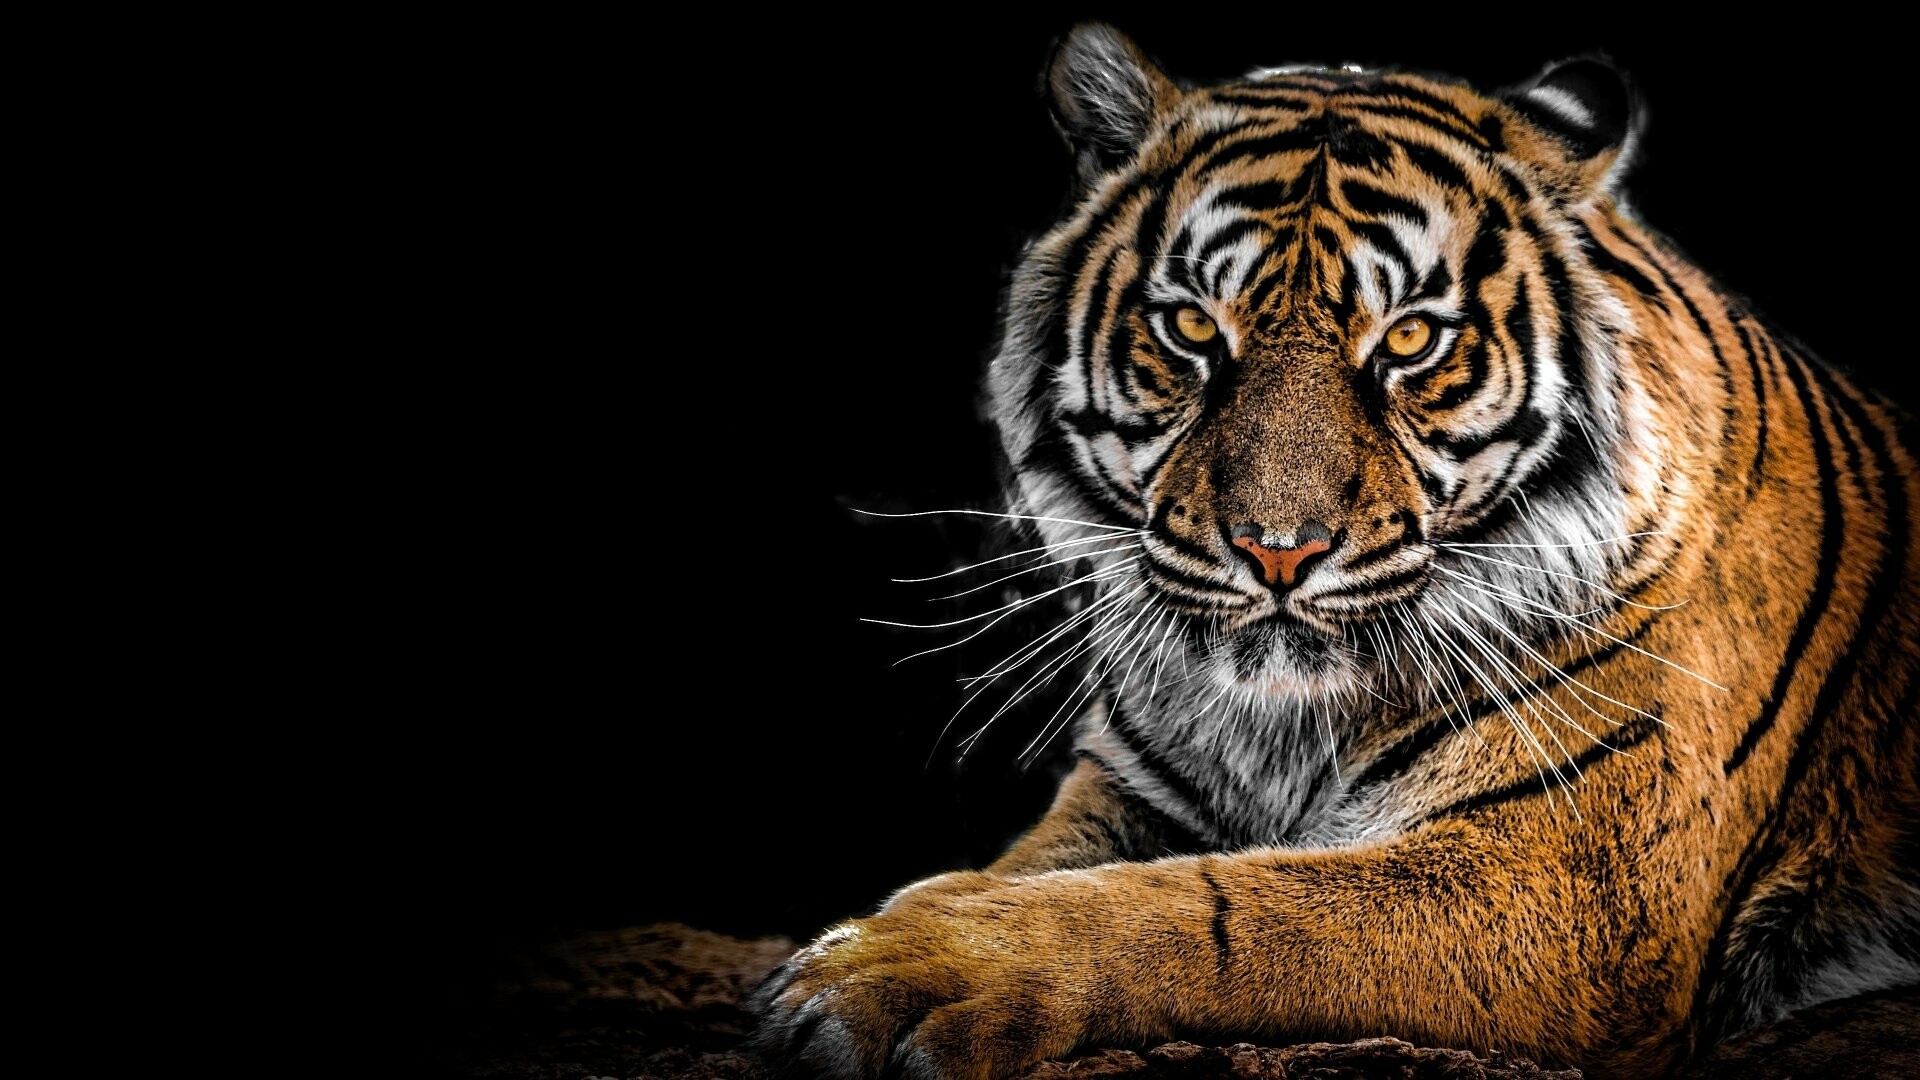 Tiger: Tigers have large front paws with long sharp claws, They use these to bring down prey, but also to scratch trees in order to mark their territory. 1920x1080 Full HD Wallpaper.